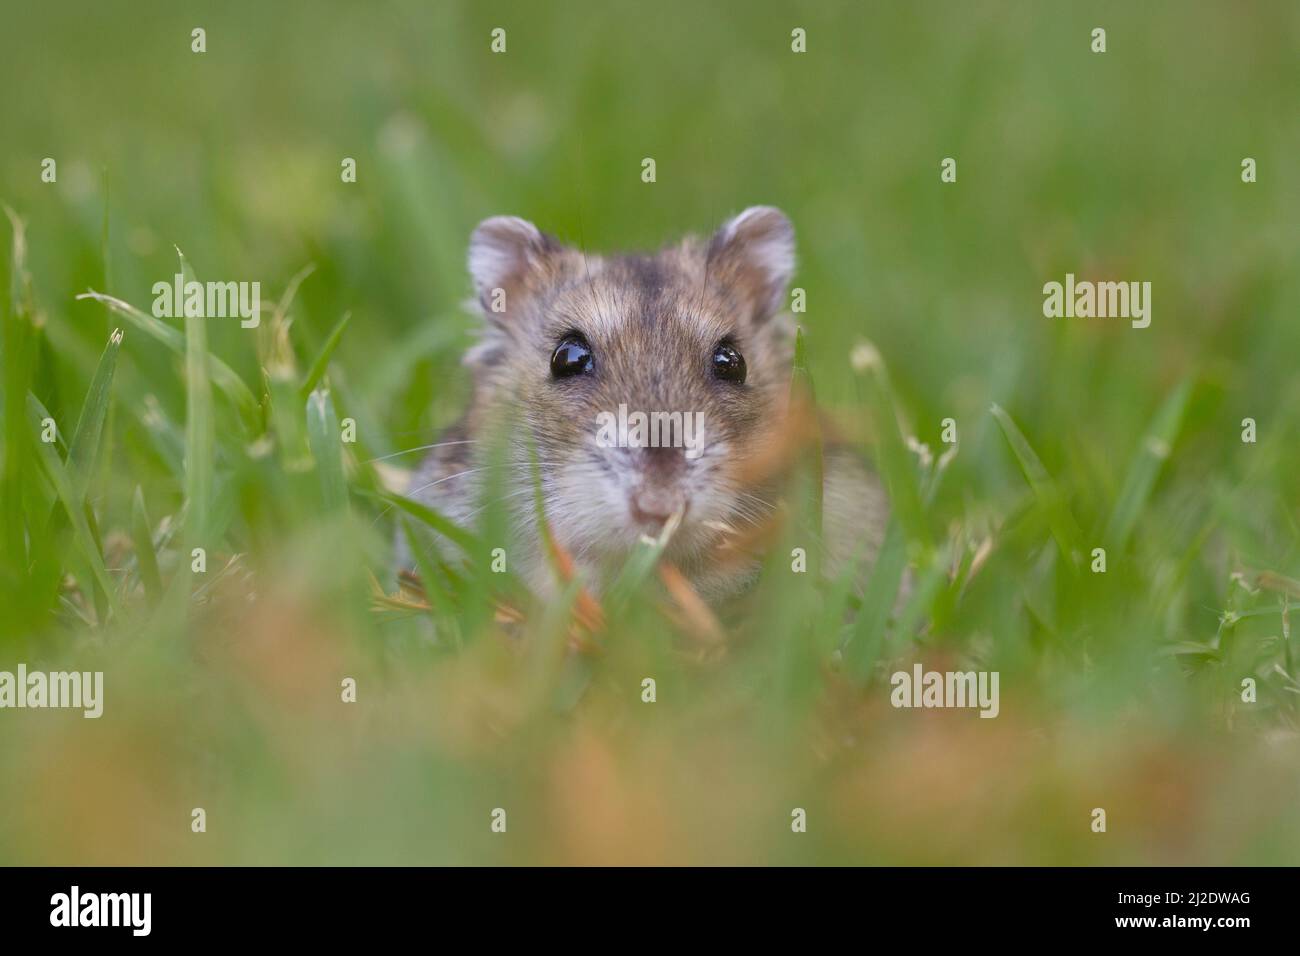 close up and selective focus of a Djungarian hamster (Phodopus sungorus), also known as the Siberian hamster, on lawn. Photographed in Israel in July Stock Photo